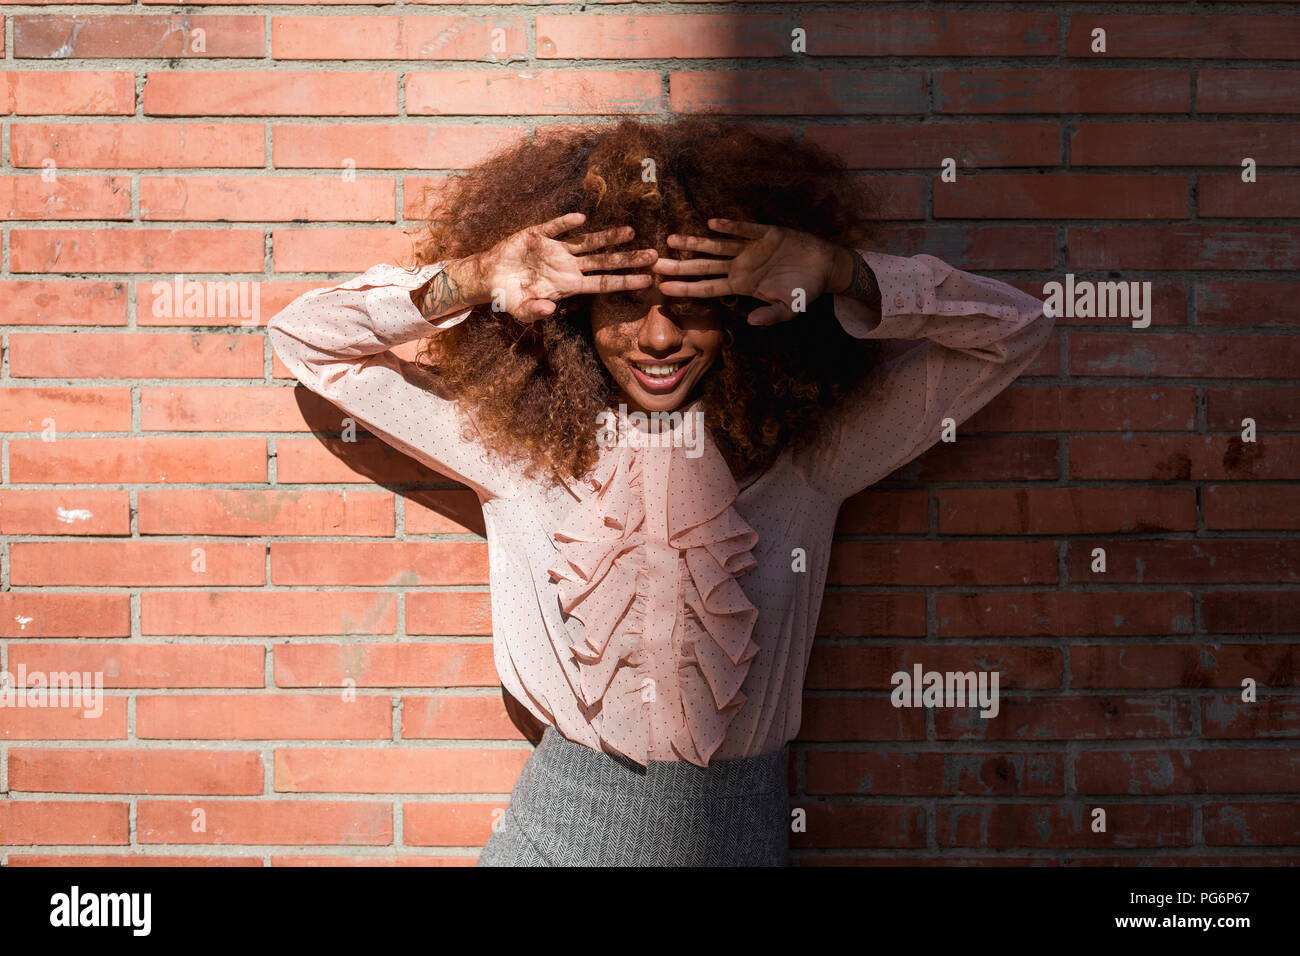 Portrait of smiling beautiful young woman with afro hairdoat brick wall in sunshine Stock Photo